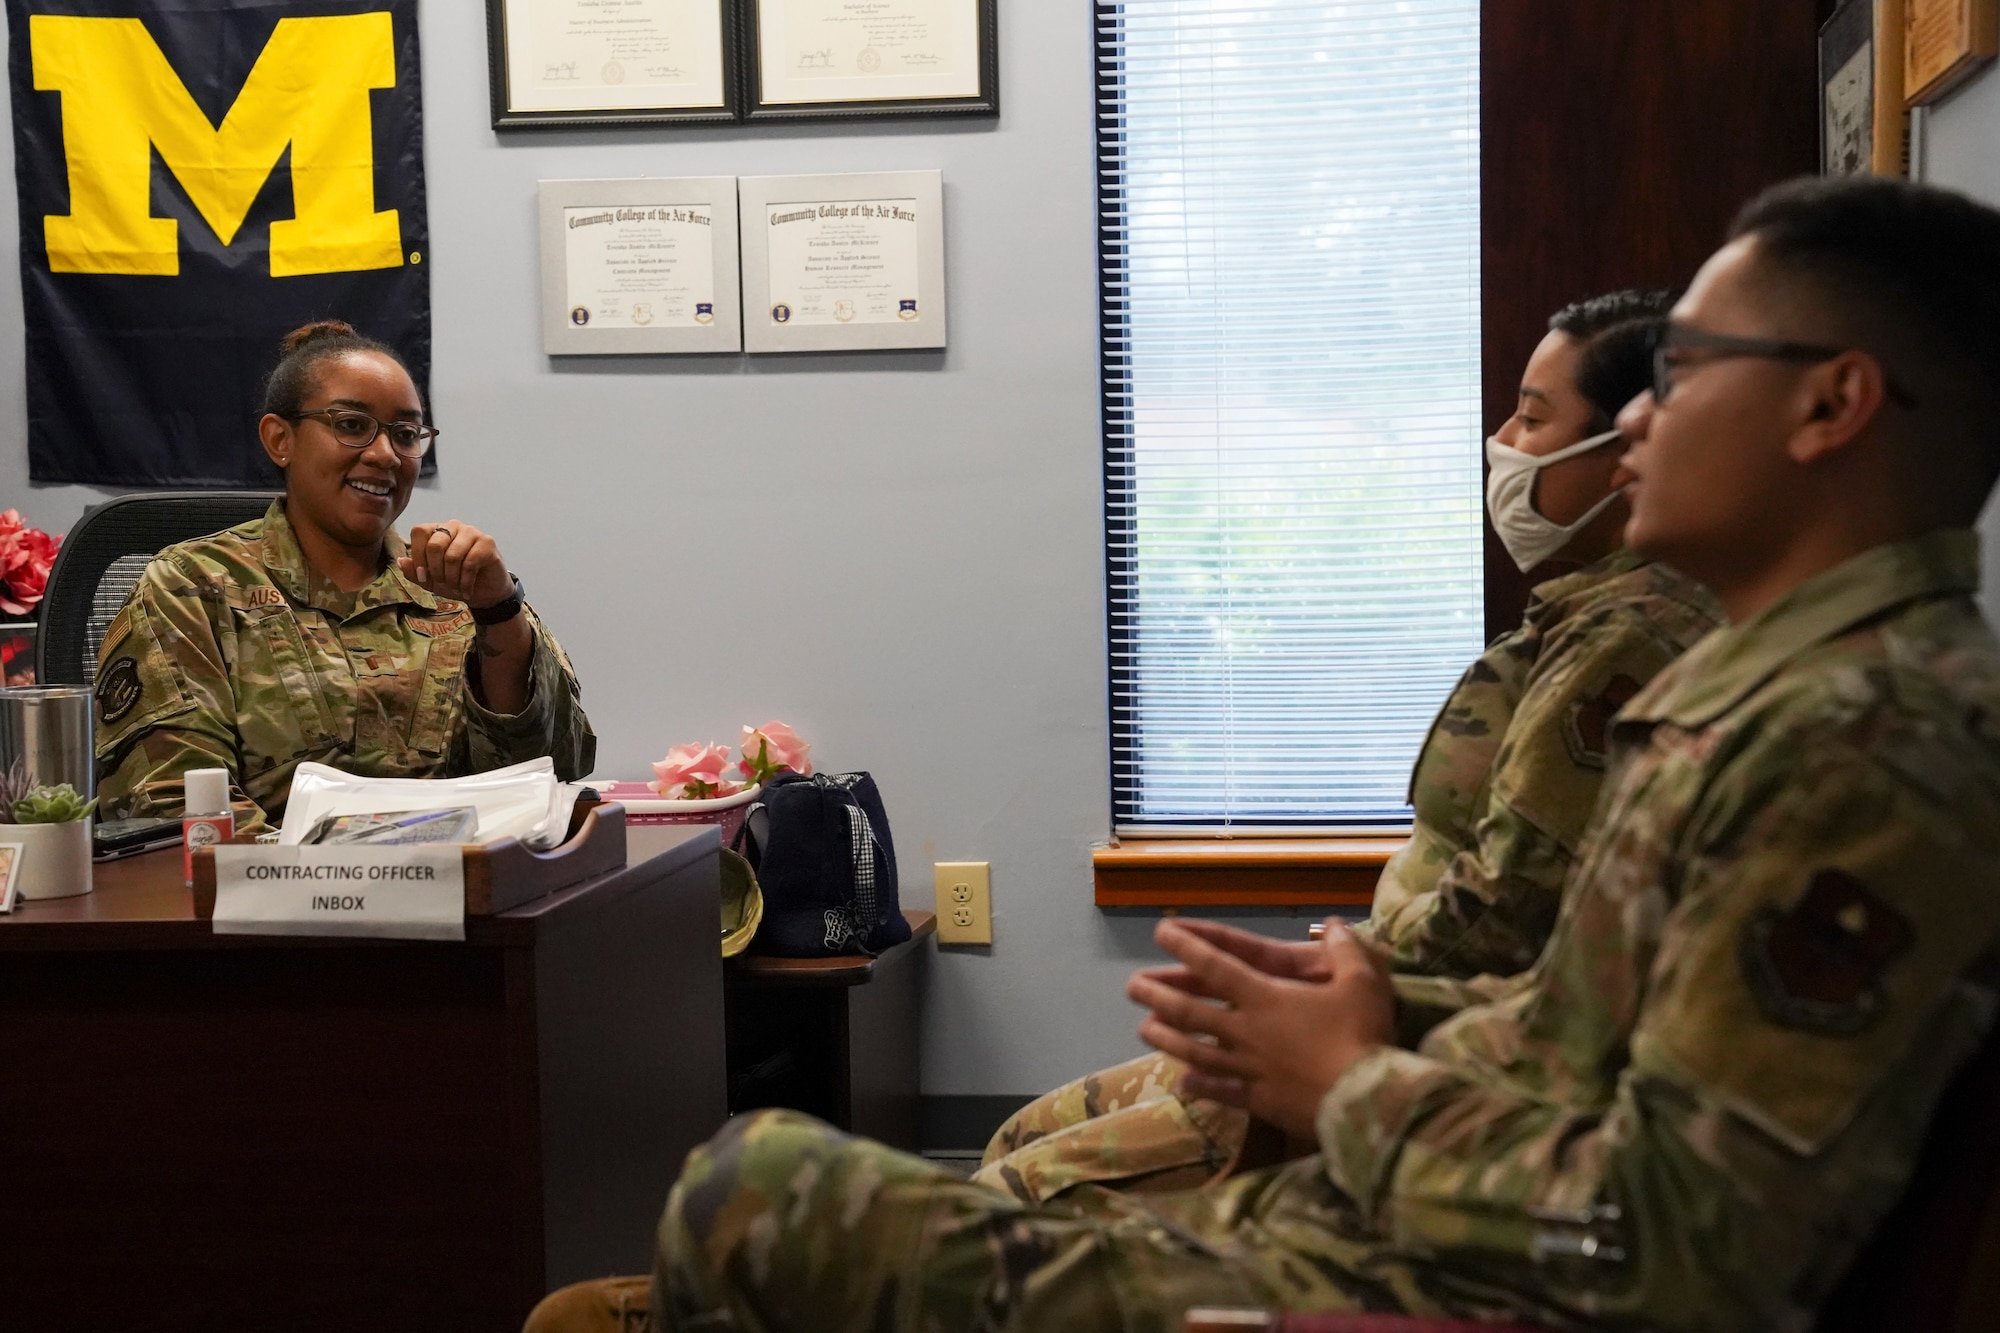 U.S. Air Force Lt. Tenisha Austin, 81st Contracting Squadron infrustructure flight commander, hosts a meeting inside the contracting building at Keesler Air Force Base, Missisippi, July 14, 2021. The 81st CONS is responsible for providing contracting support to the 81st Training Wing, tenant units and other Defense Department missions across the globe. (U.S. Air Force photo by Senior Airman Spencer Tobler)